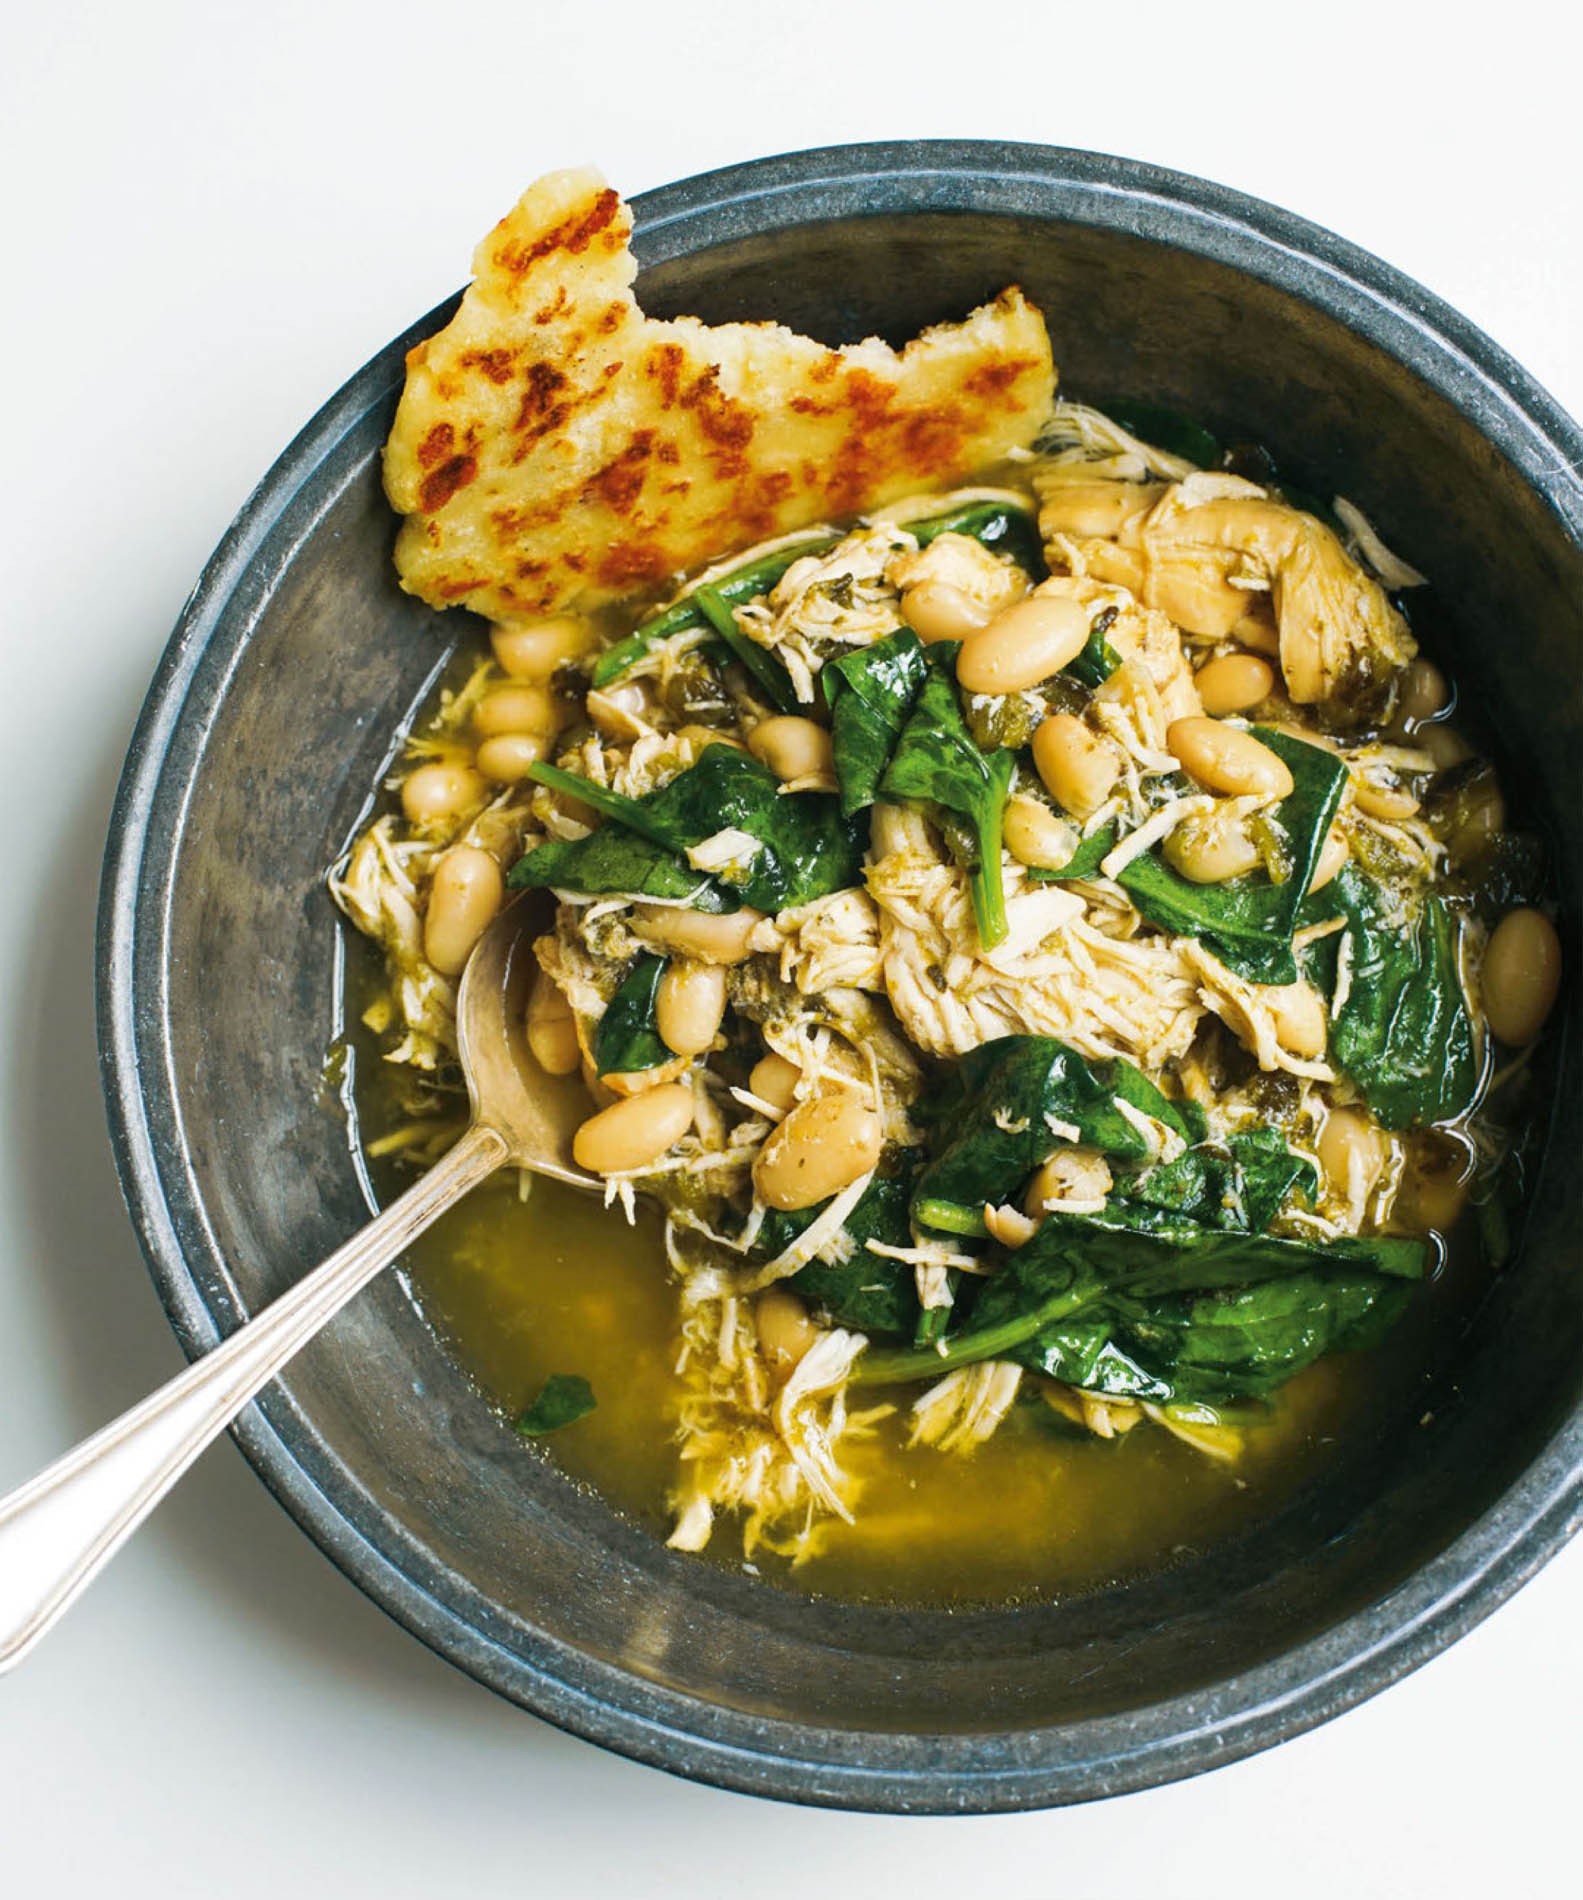 Shredded Chicken And White Bean Chili With Roasted Poblanos From Slow Cook Modern By Liana Krissoff